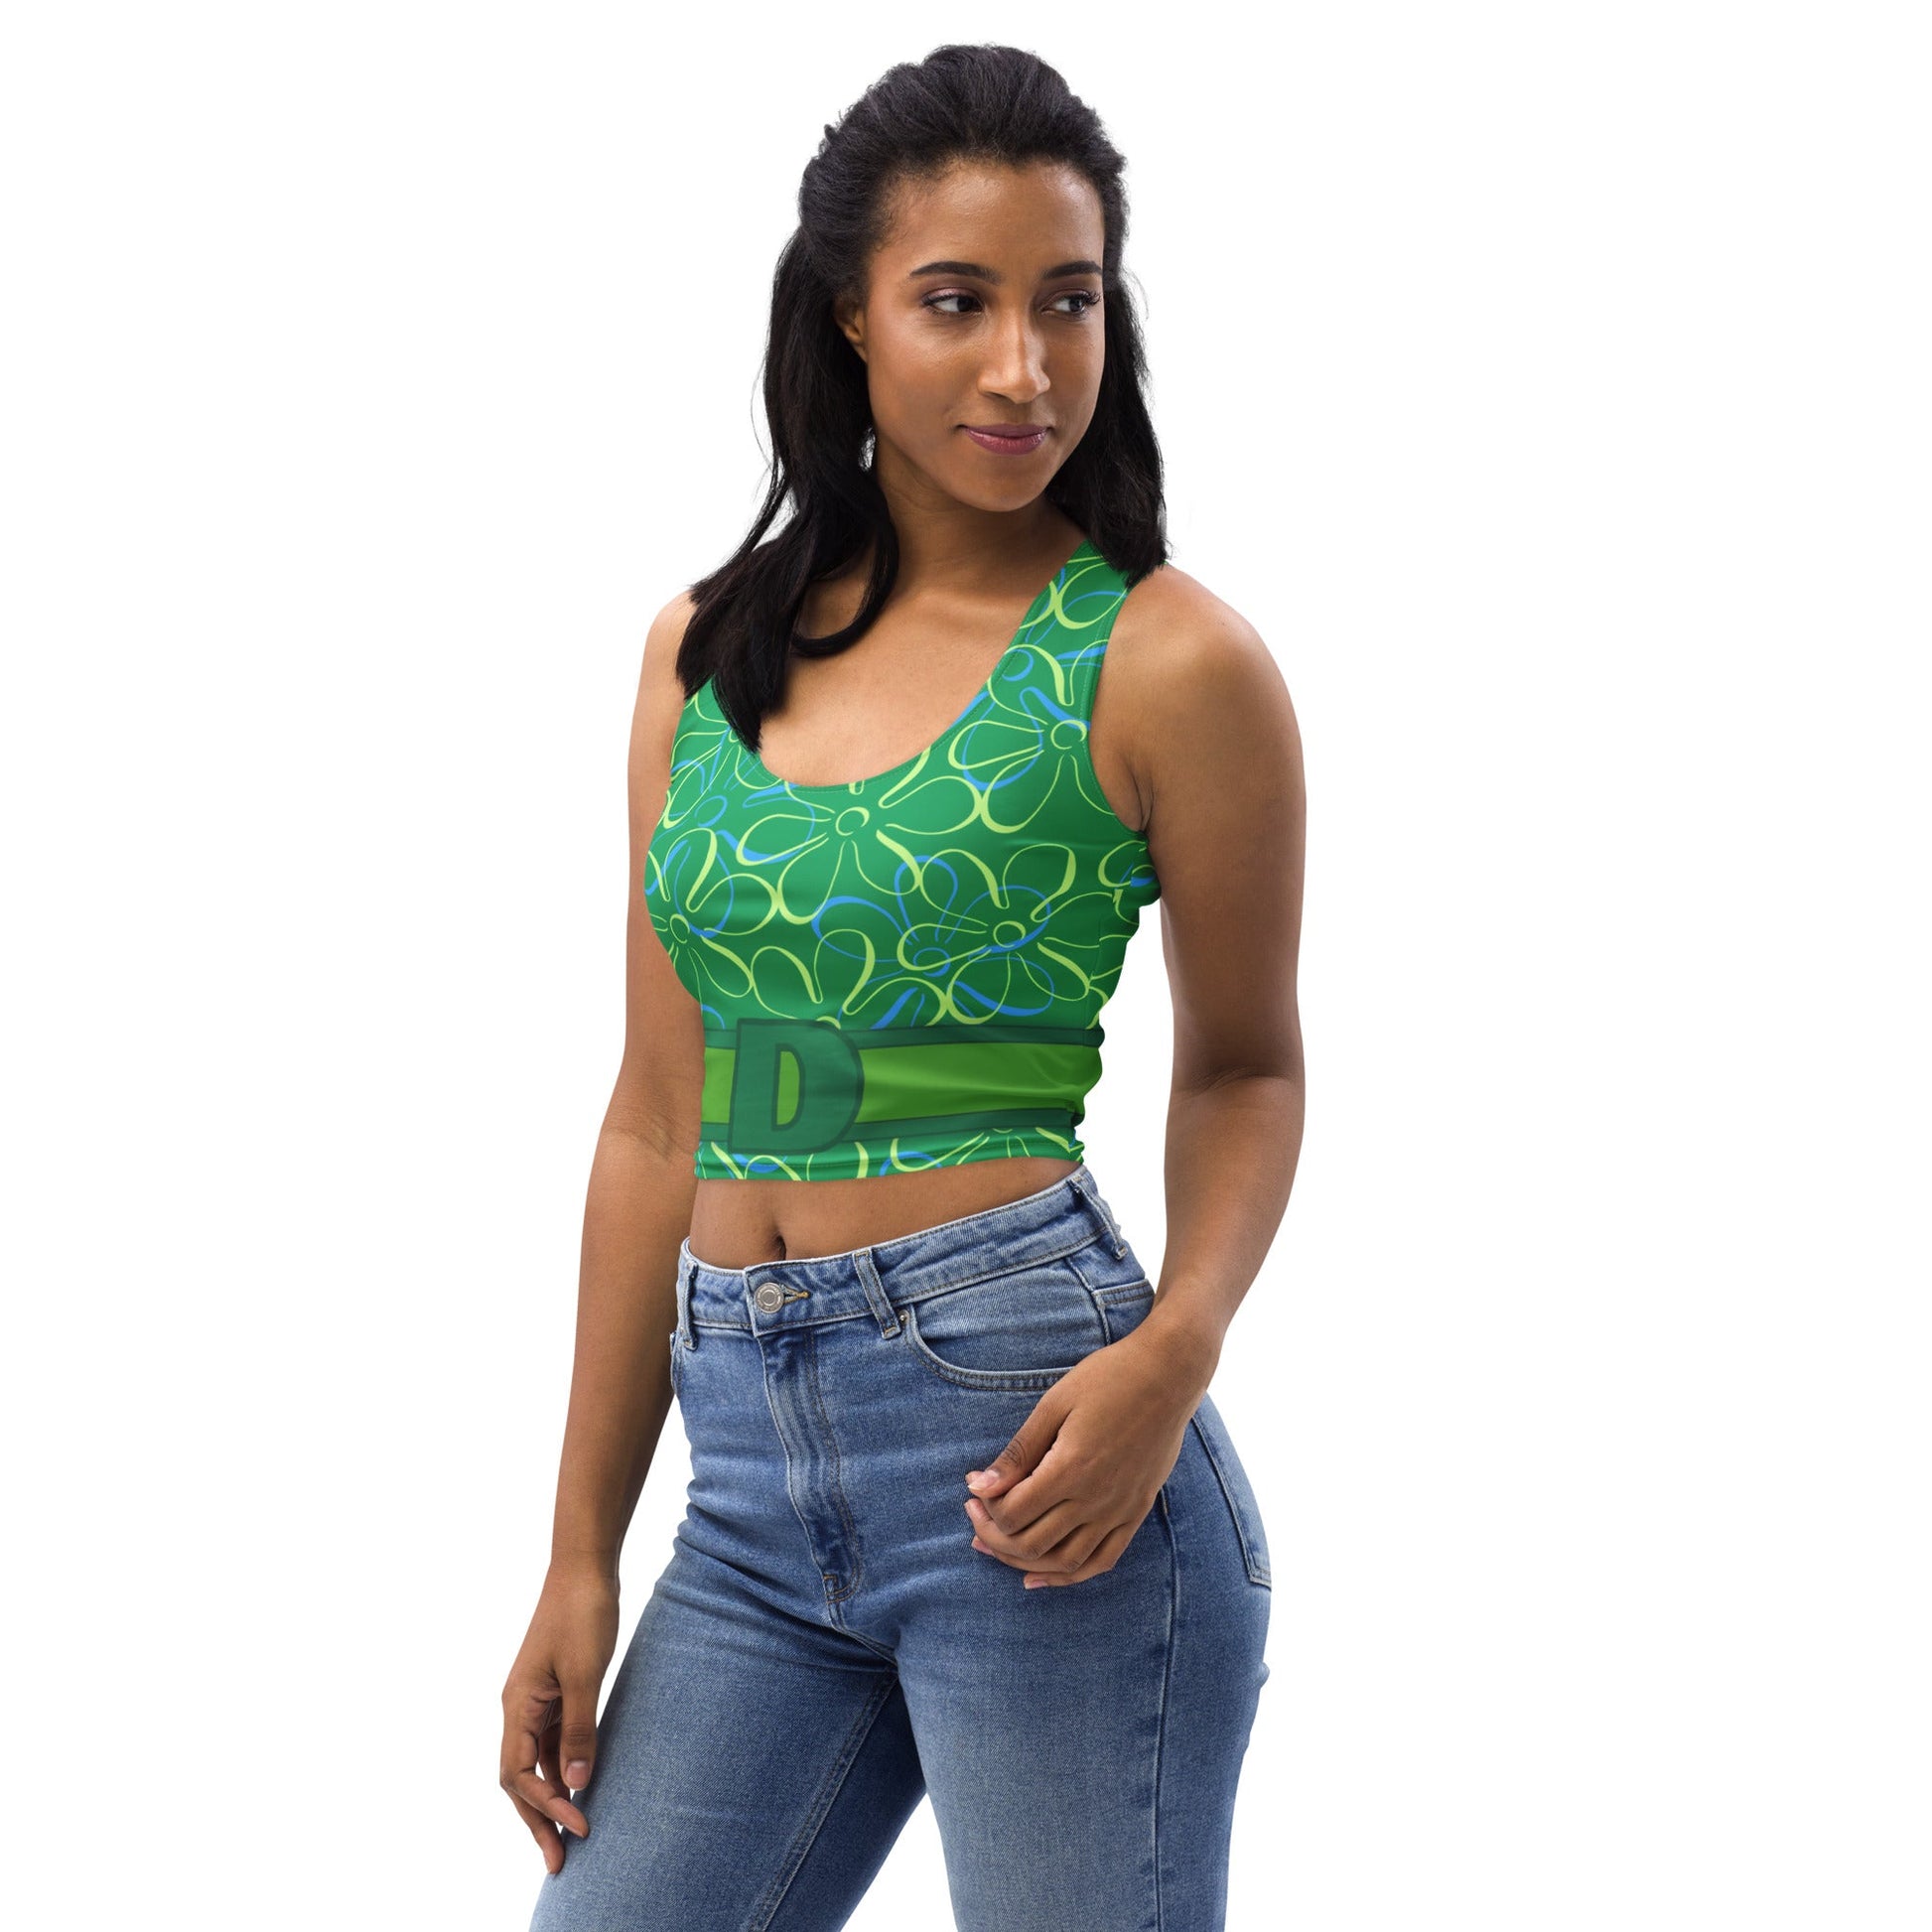 The Disgust Emotion Crop Top disgust costumedisgust styleWrong Lever Clothing